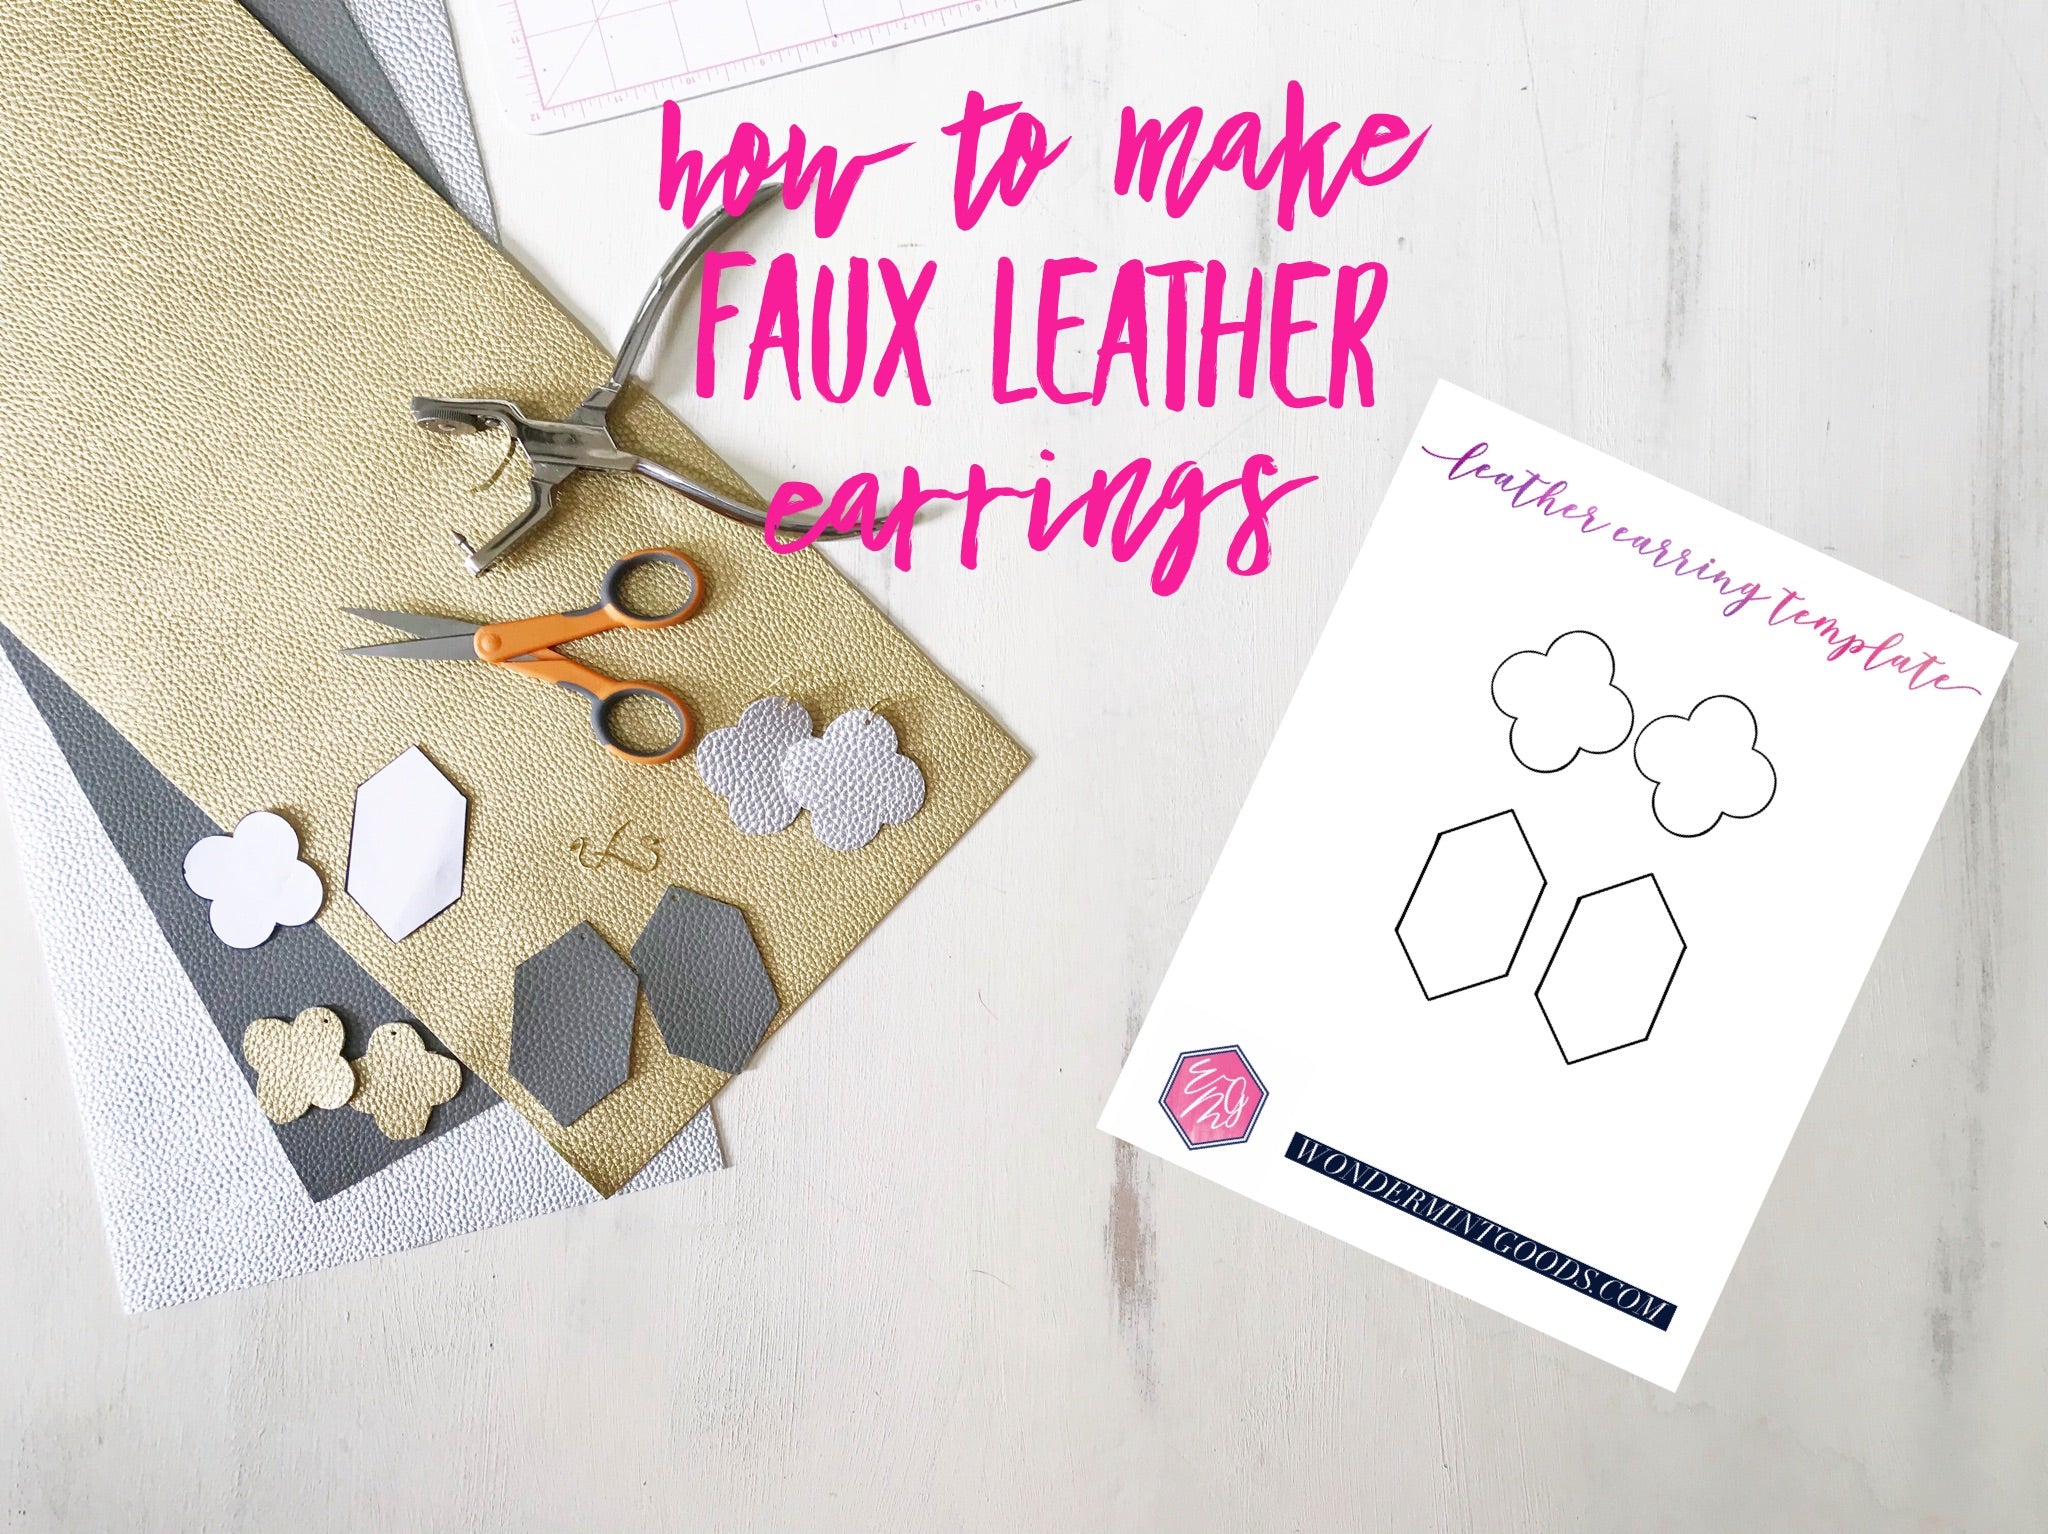 How to Use Cricut Faux Leather